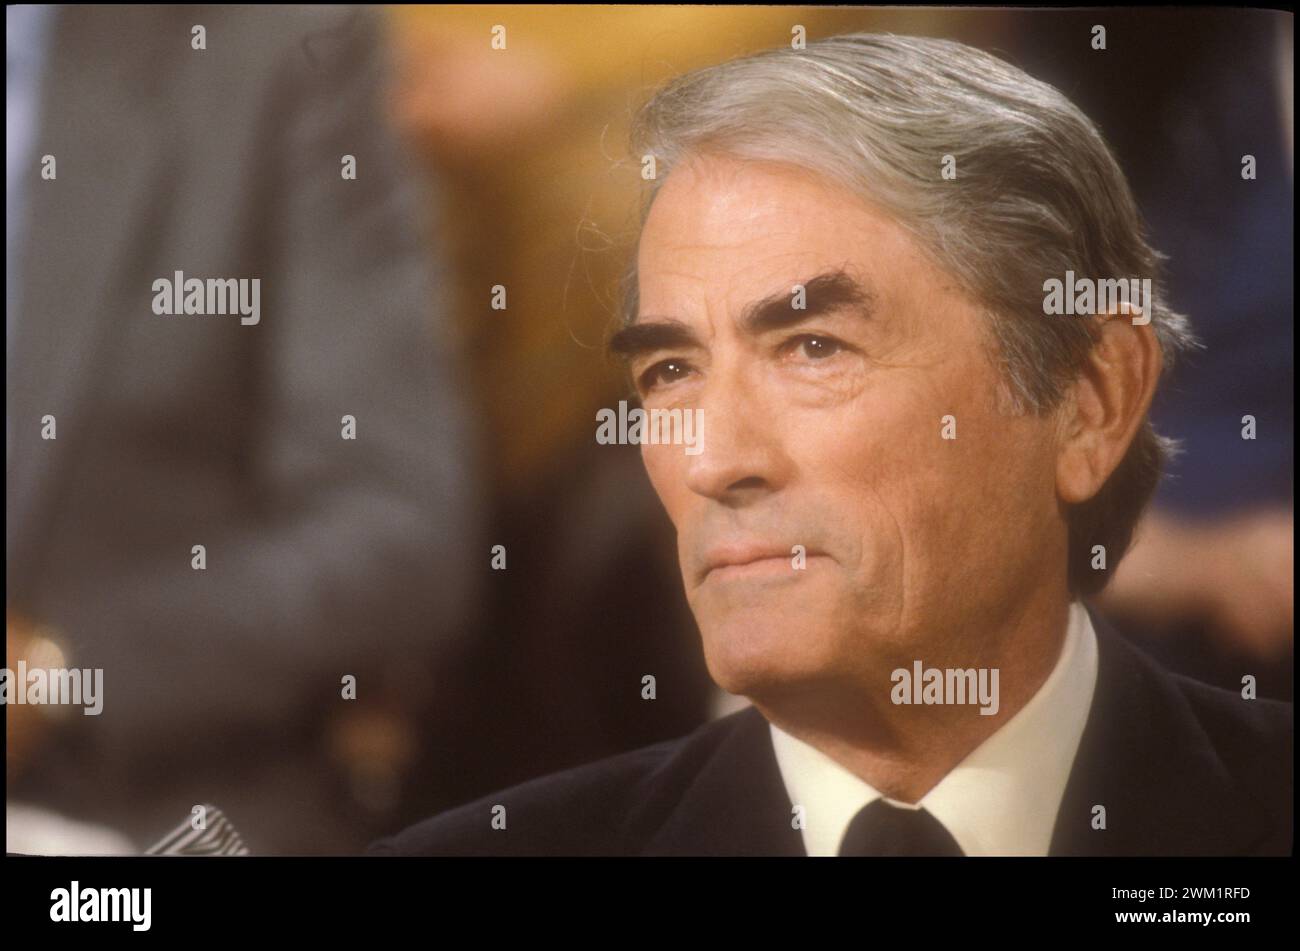 MME4713094 Actor GREGORY PECK, 1983/GREGORY PECK, attore, 1983; (add.info.: Actor GREGORY PECK, 1983/GREGORY PECK, attore, 1983); © Marcello Mencarini. All rights reserved 2024. Stock Photo